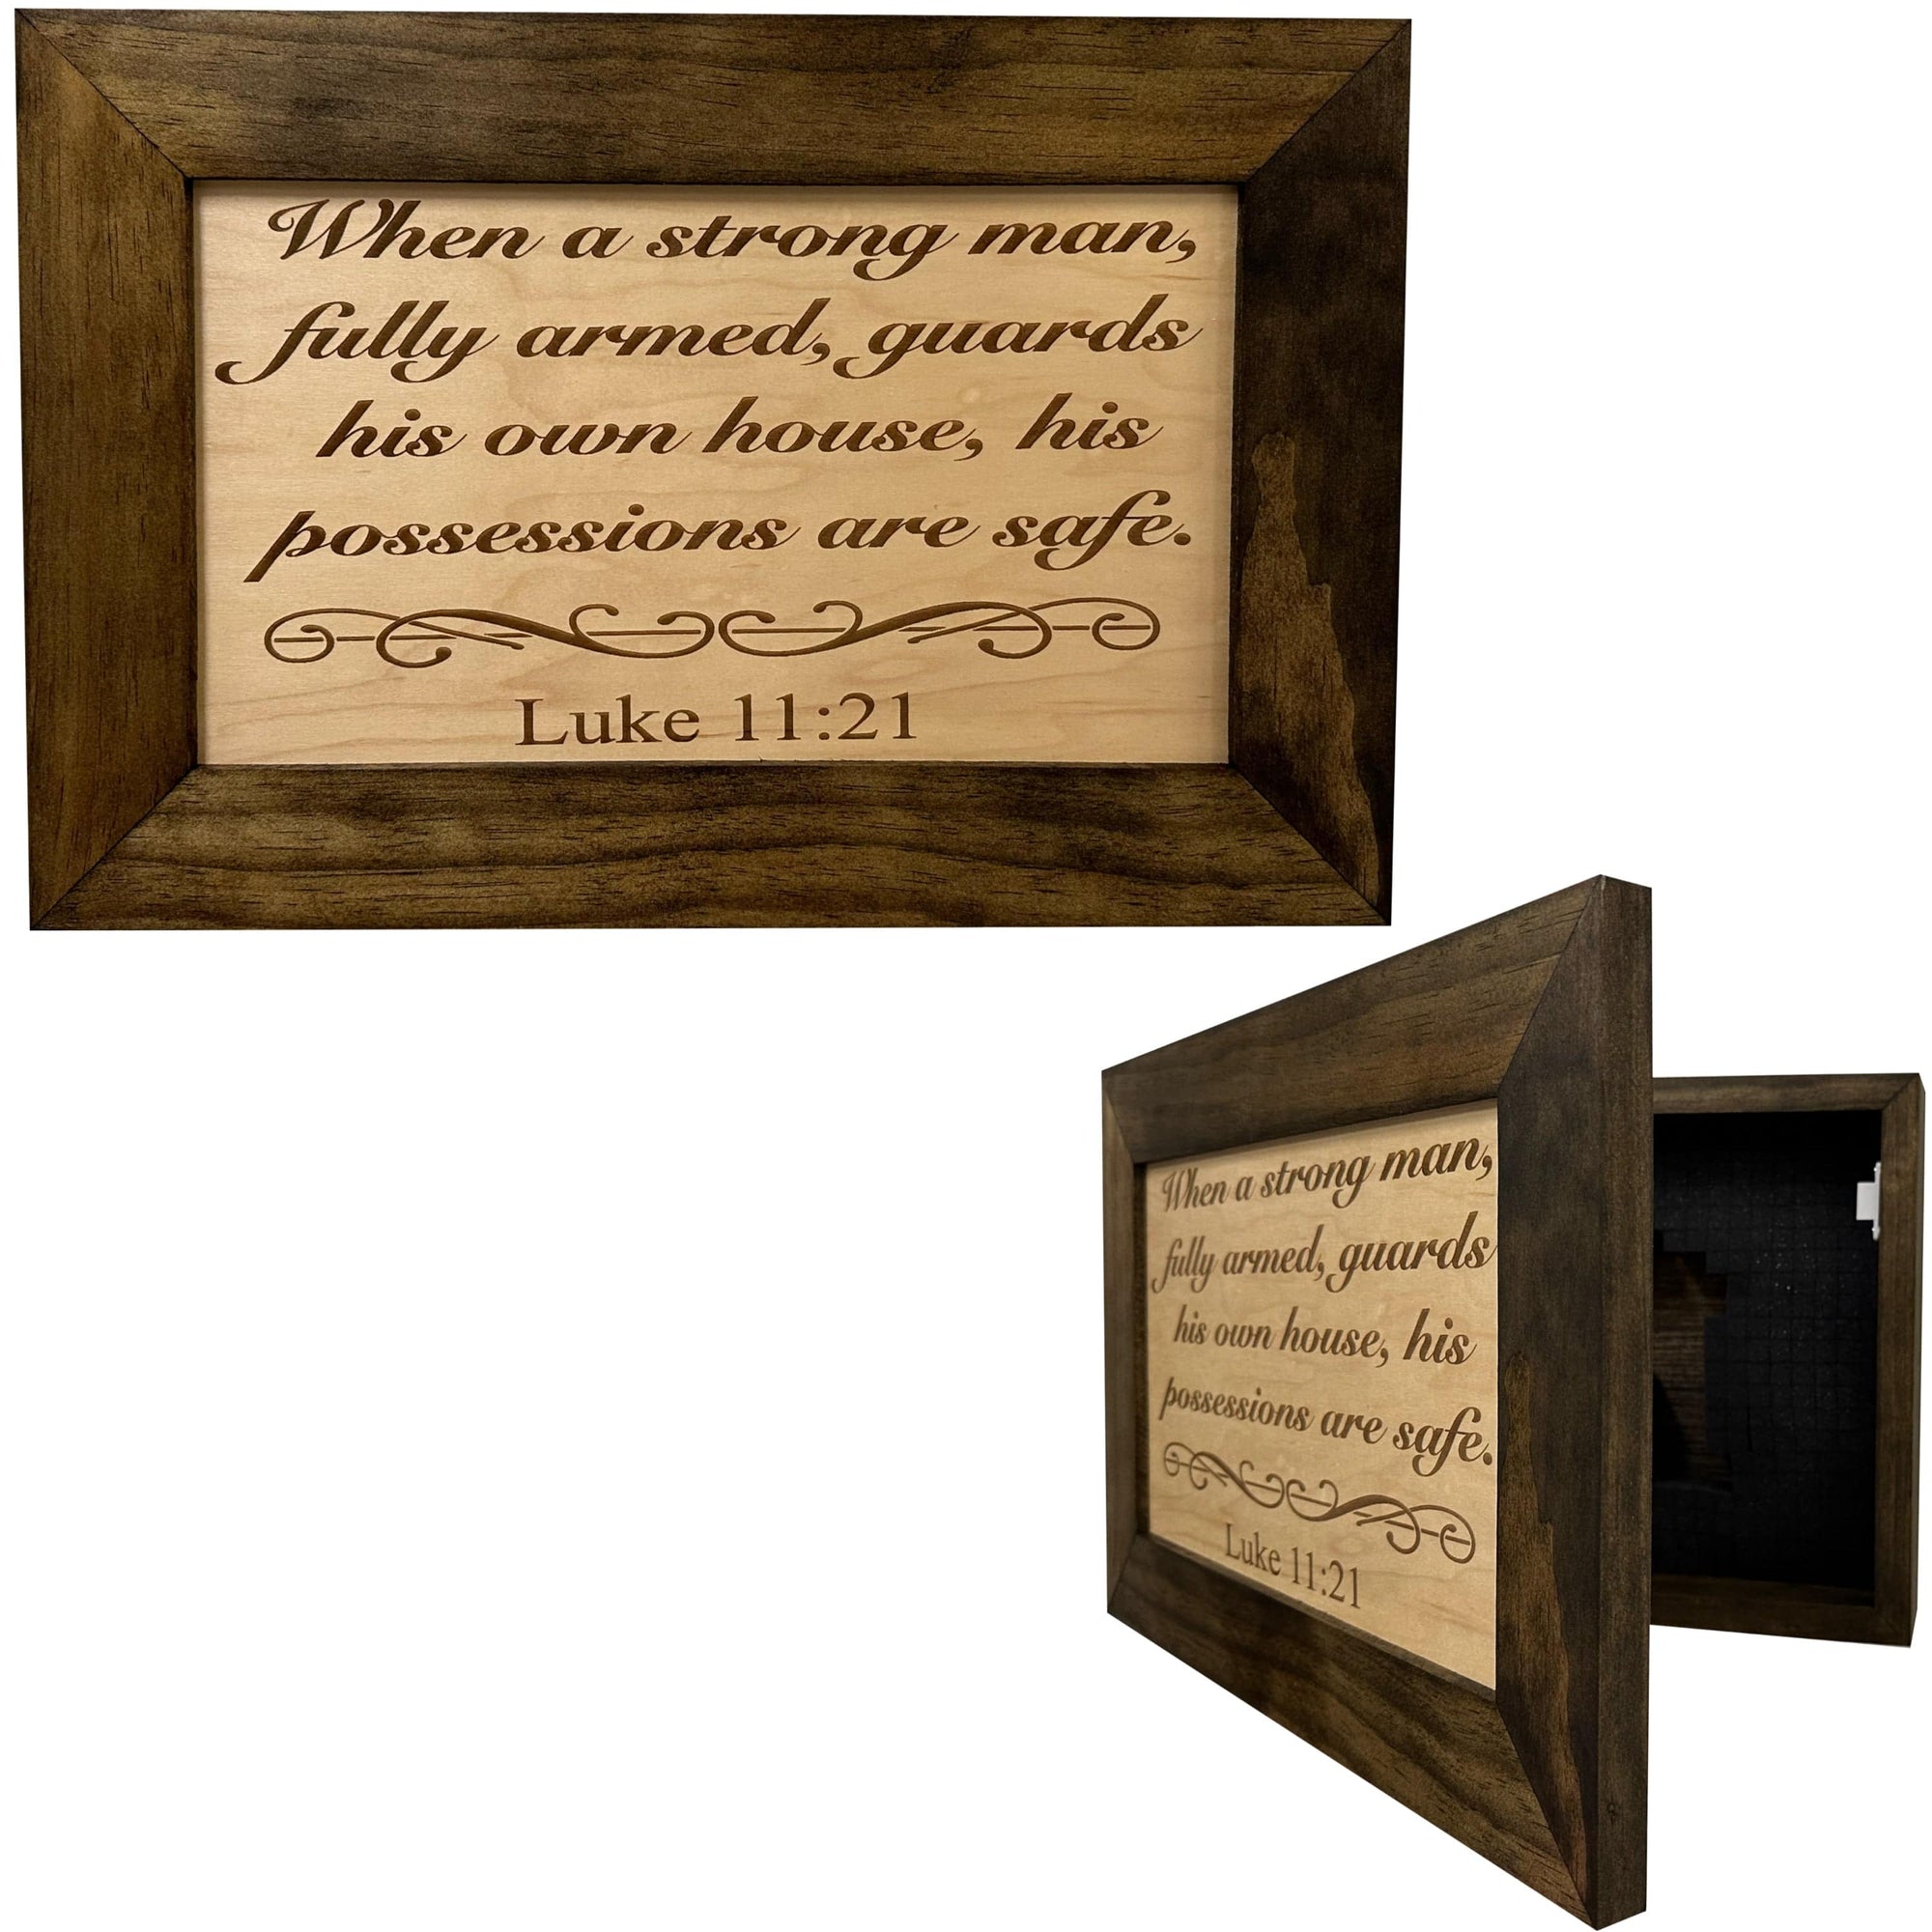 Wood Gun Cabinet Bible Verse Luke 11:21 Wall Decoration - Hidden Gun Safe To Securely Store Your Gun In Plain Sight by Bellewood Designs Armadillo Safe and Vault